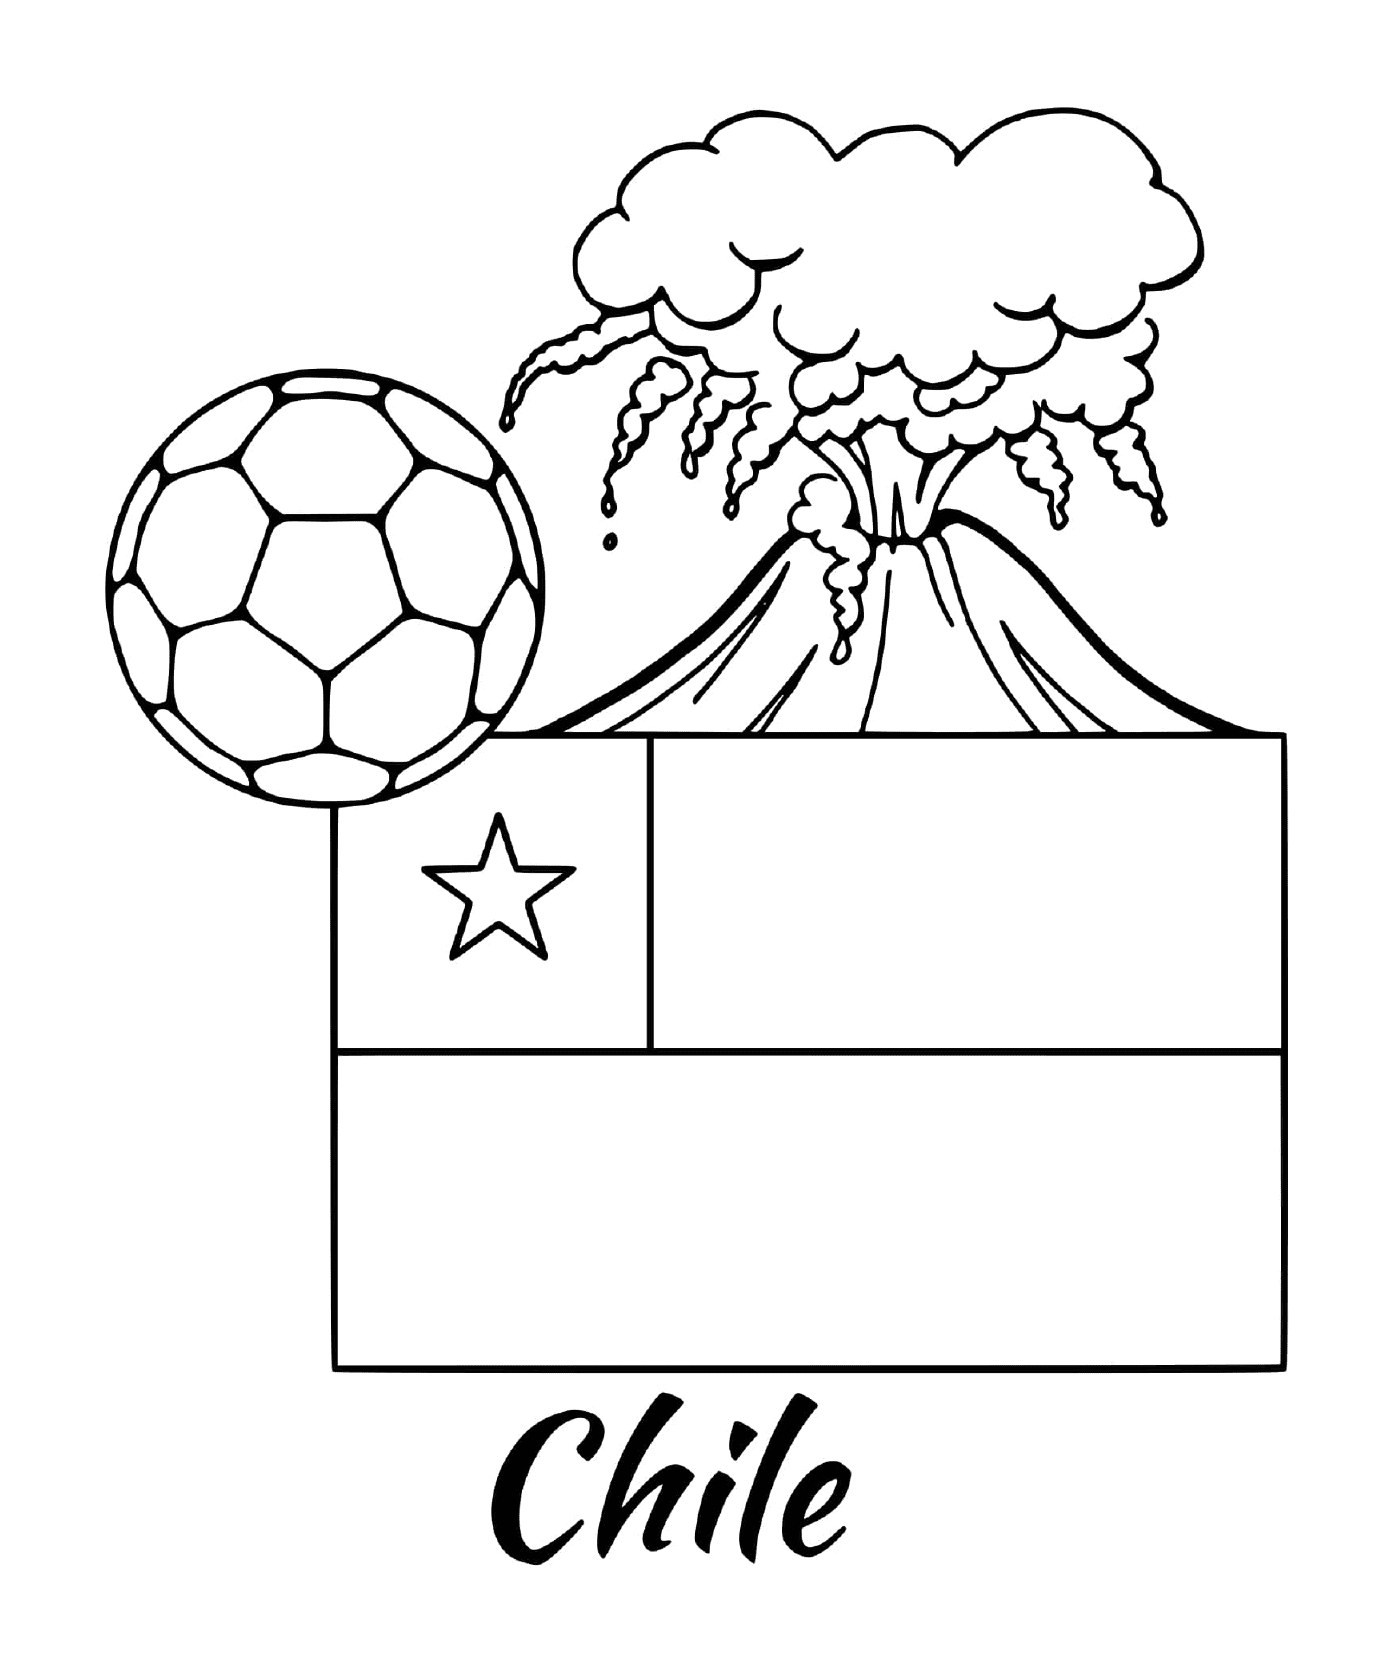  Flag of Chile, volcano 